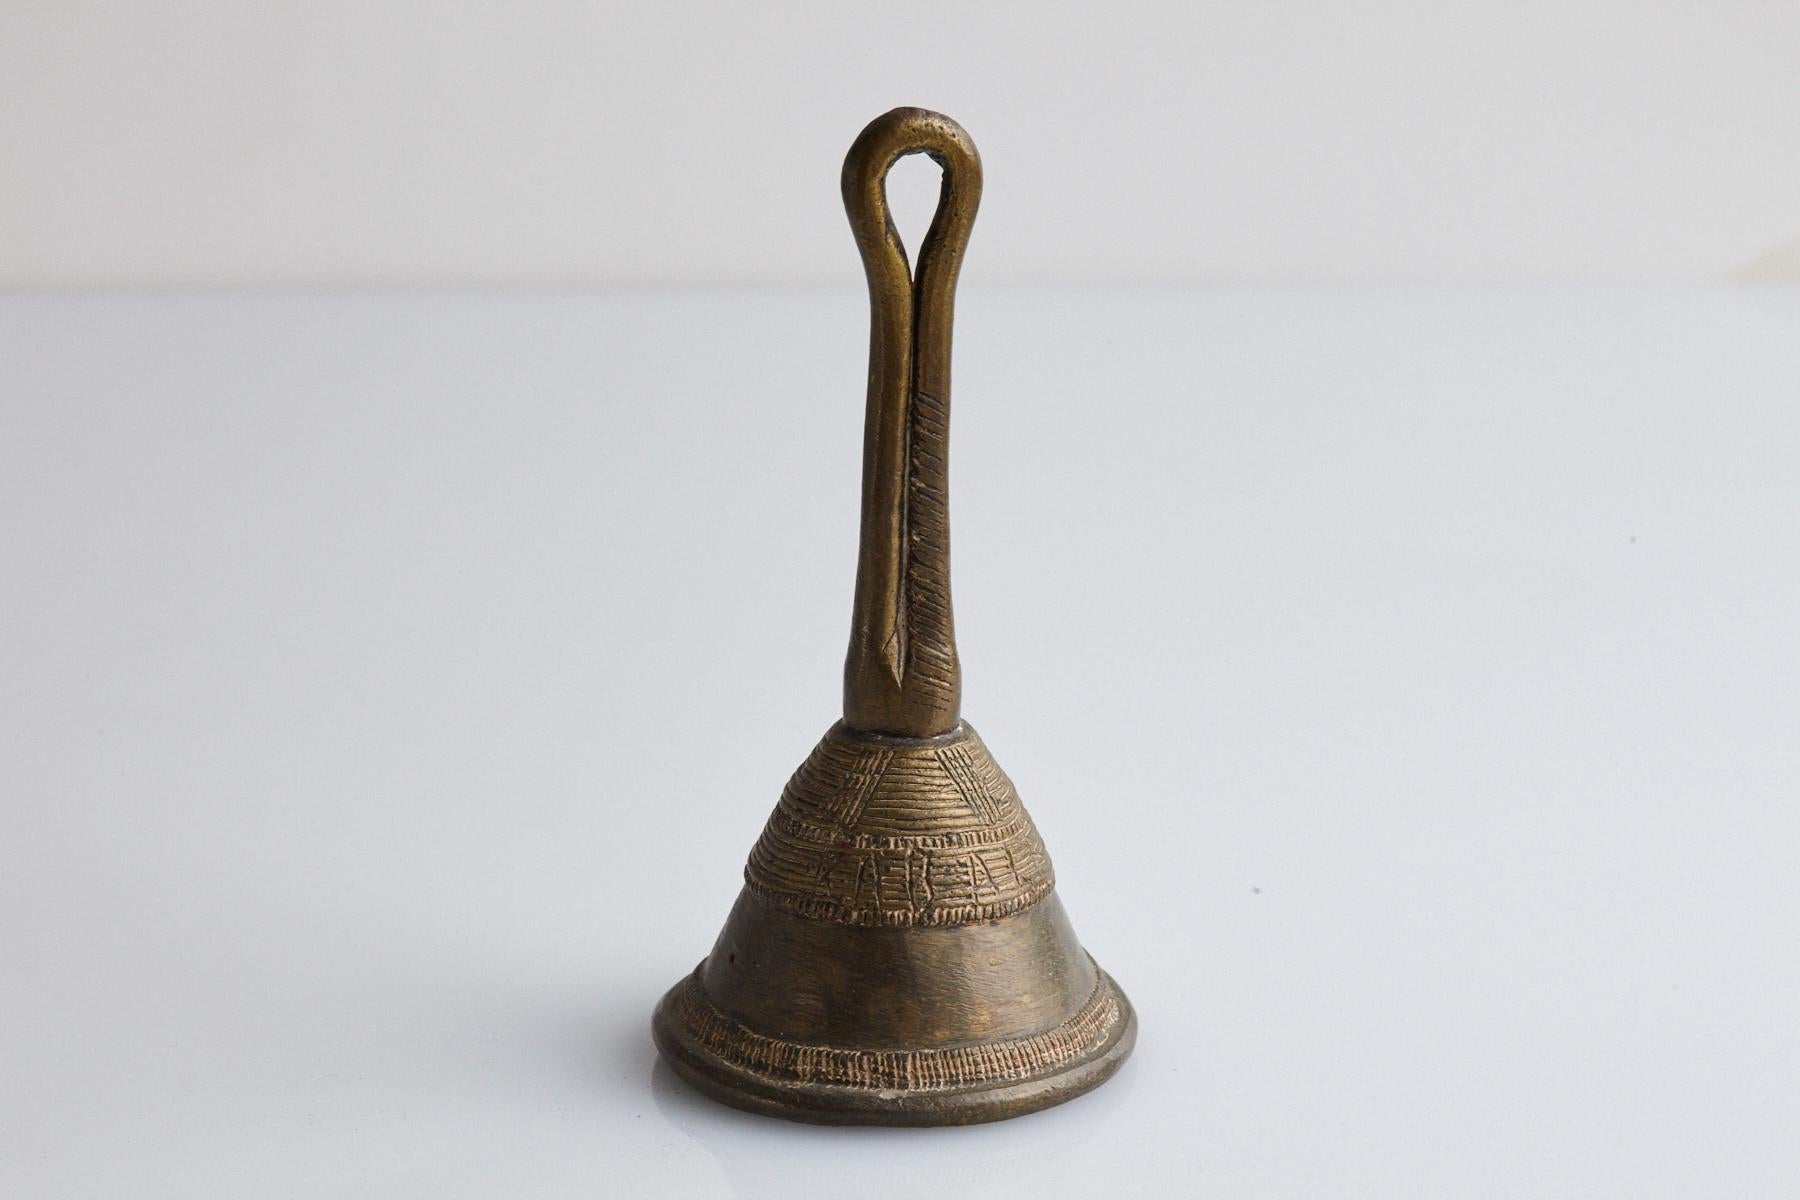 Bronze Dan (also called Yakuba) bell, Cote d'Ivoire, circa 1960s.
This Dan bell is made from the lost-wax process. It has a looped handle and stylized designs on the bell and around the rim.

The numbers are the inventory numbers from Penn State